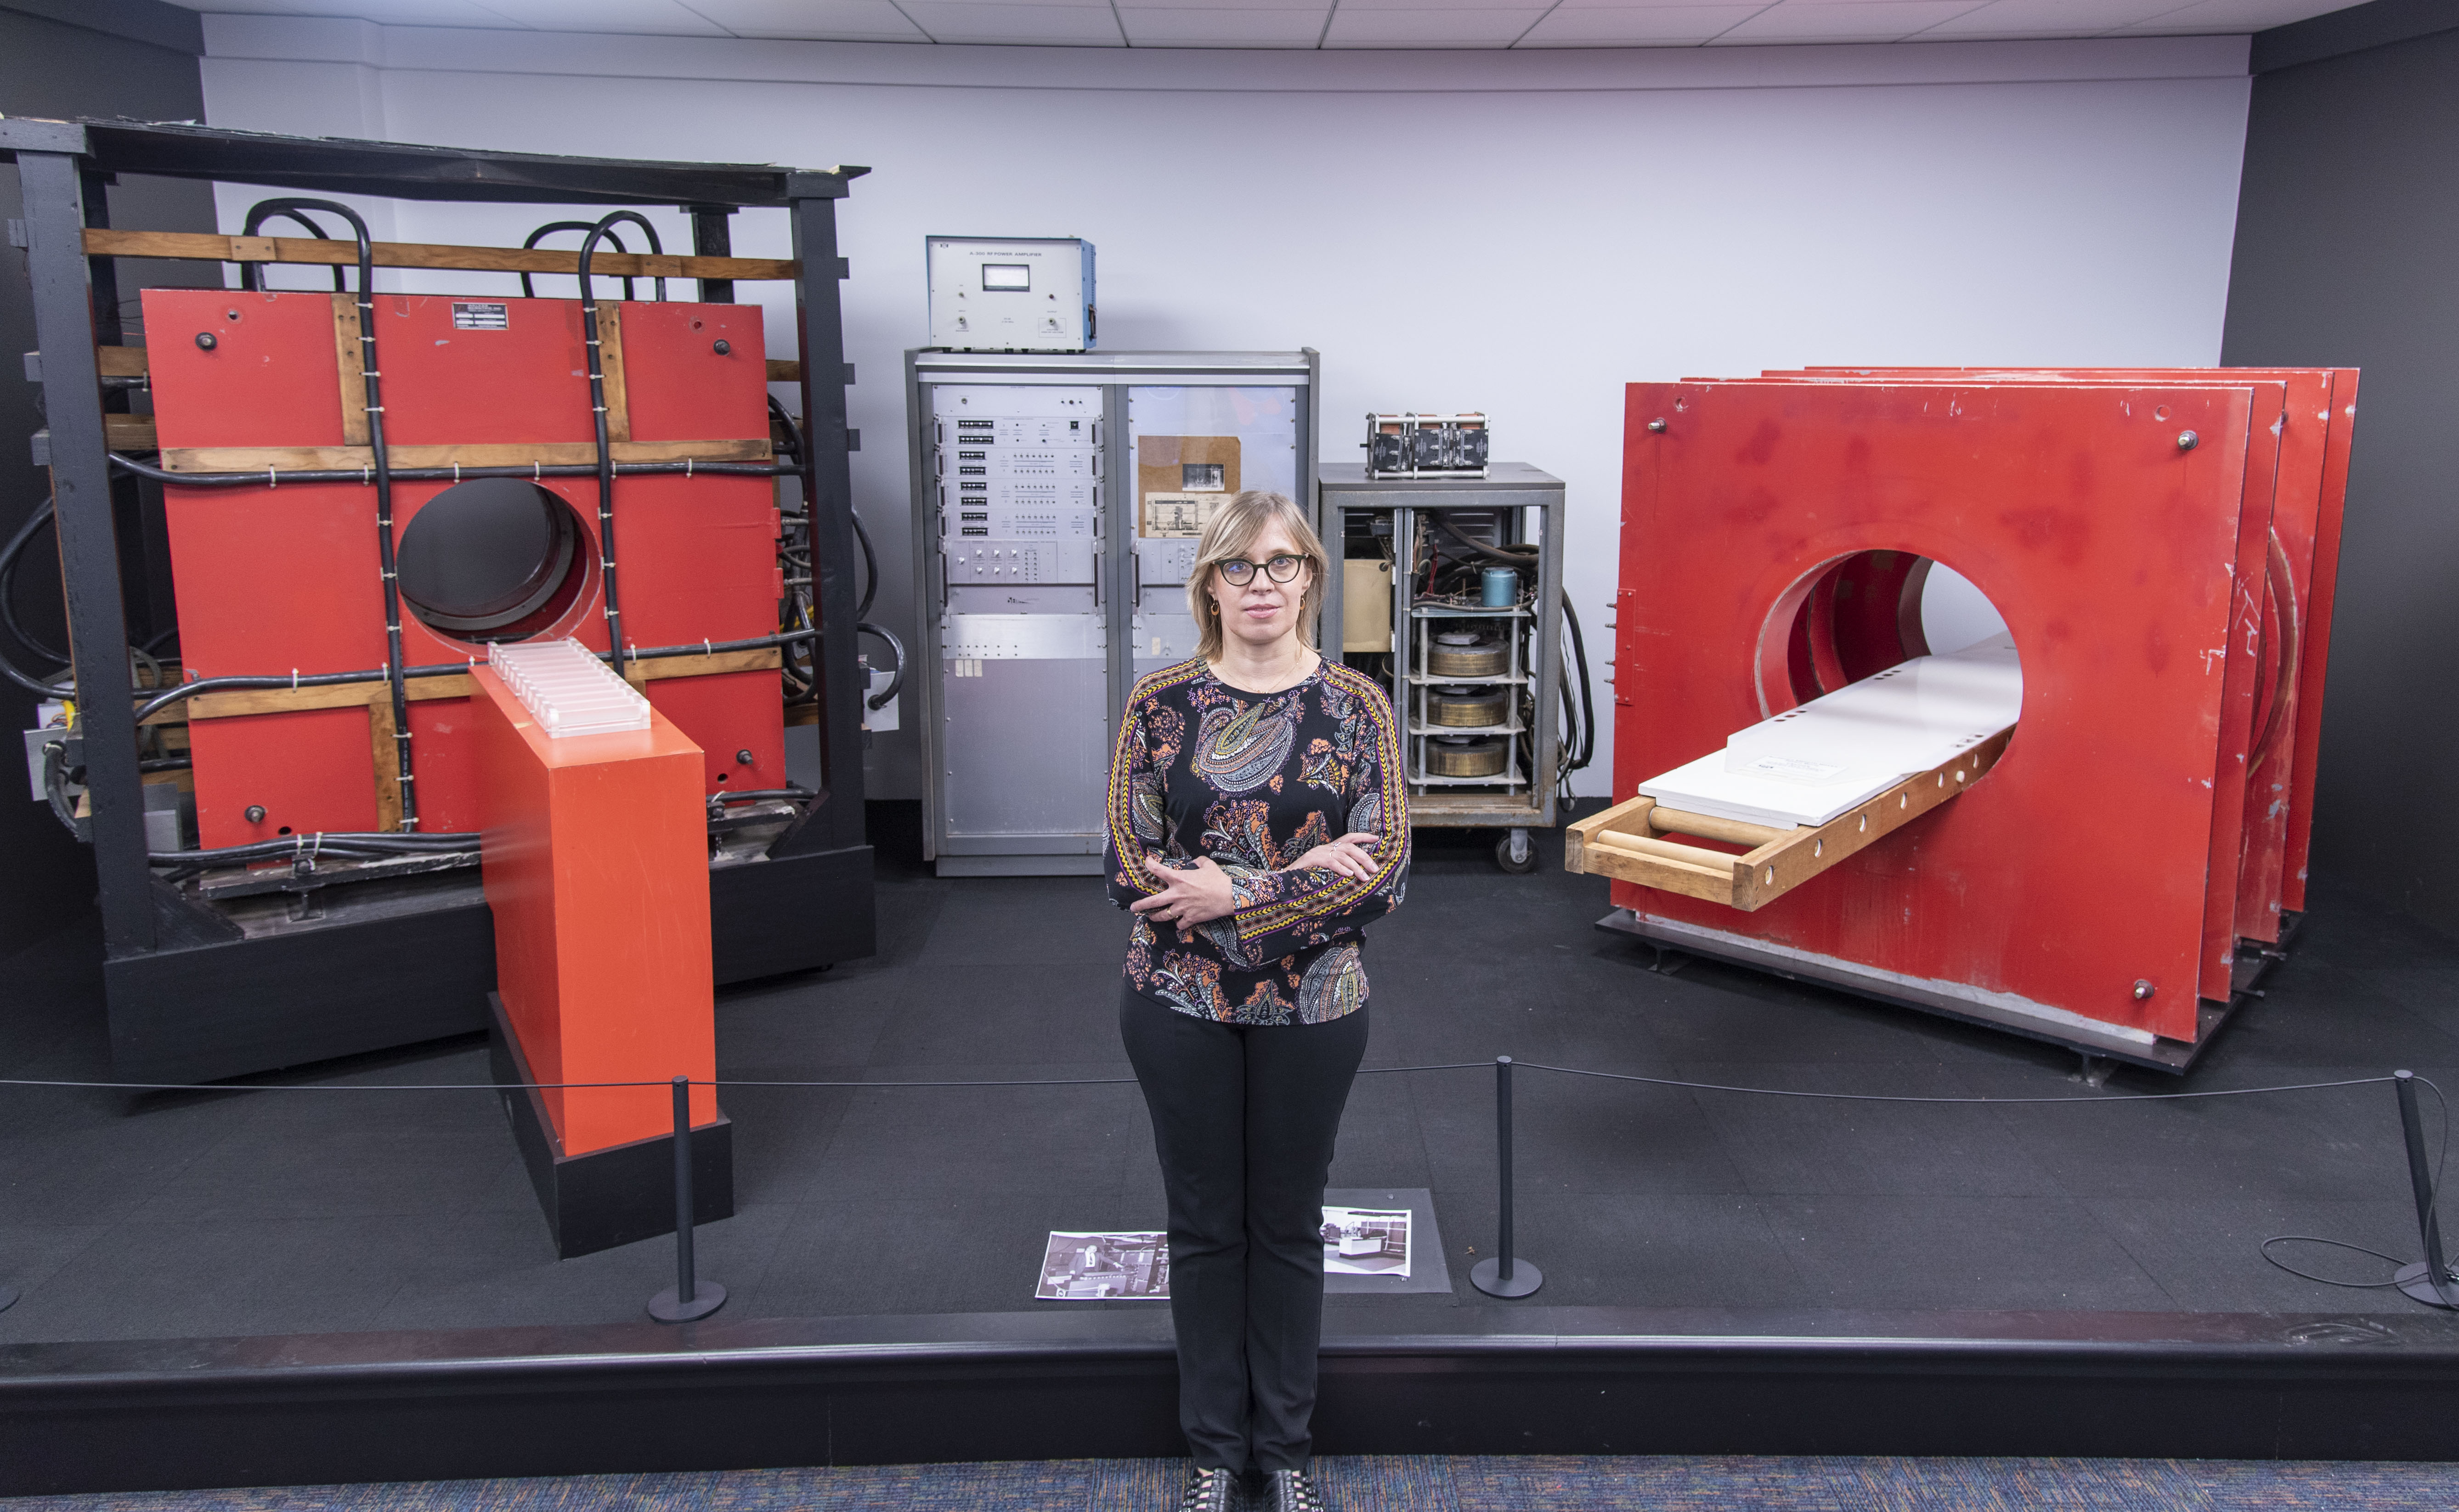 Luisa Ciobanu stands in front of Big Red, the first human MRI scanner, in the ILLINOIS MRI Exhibit at Beckman.